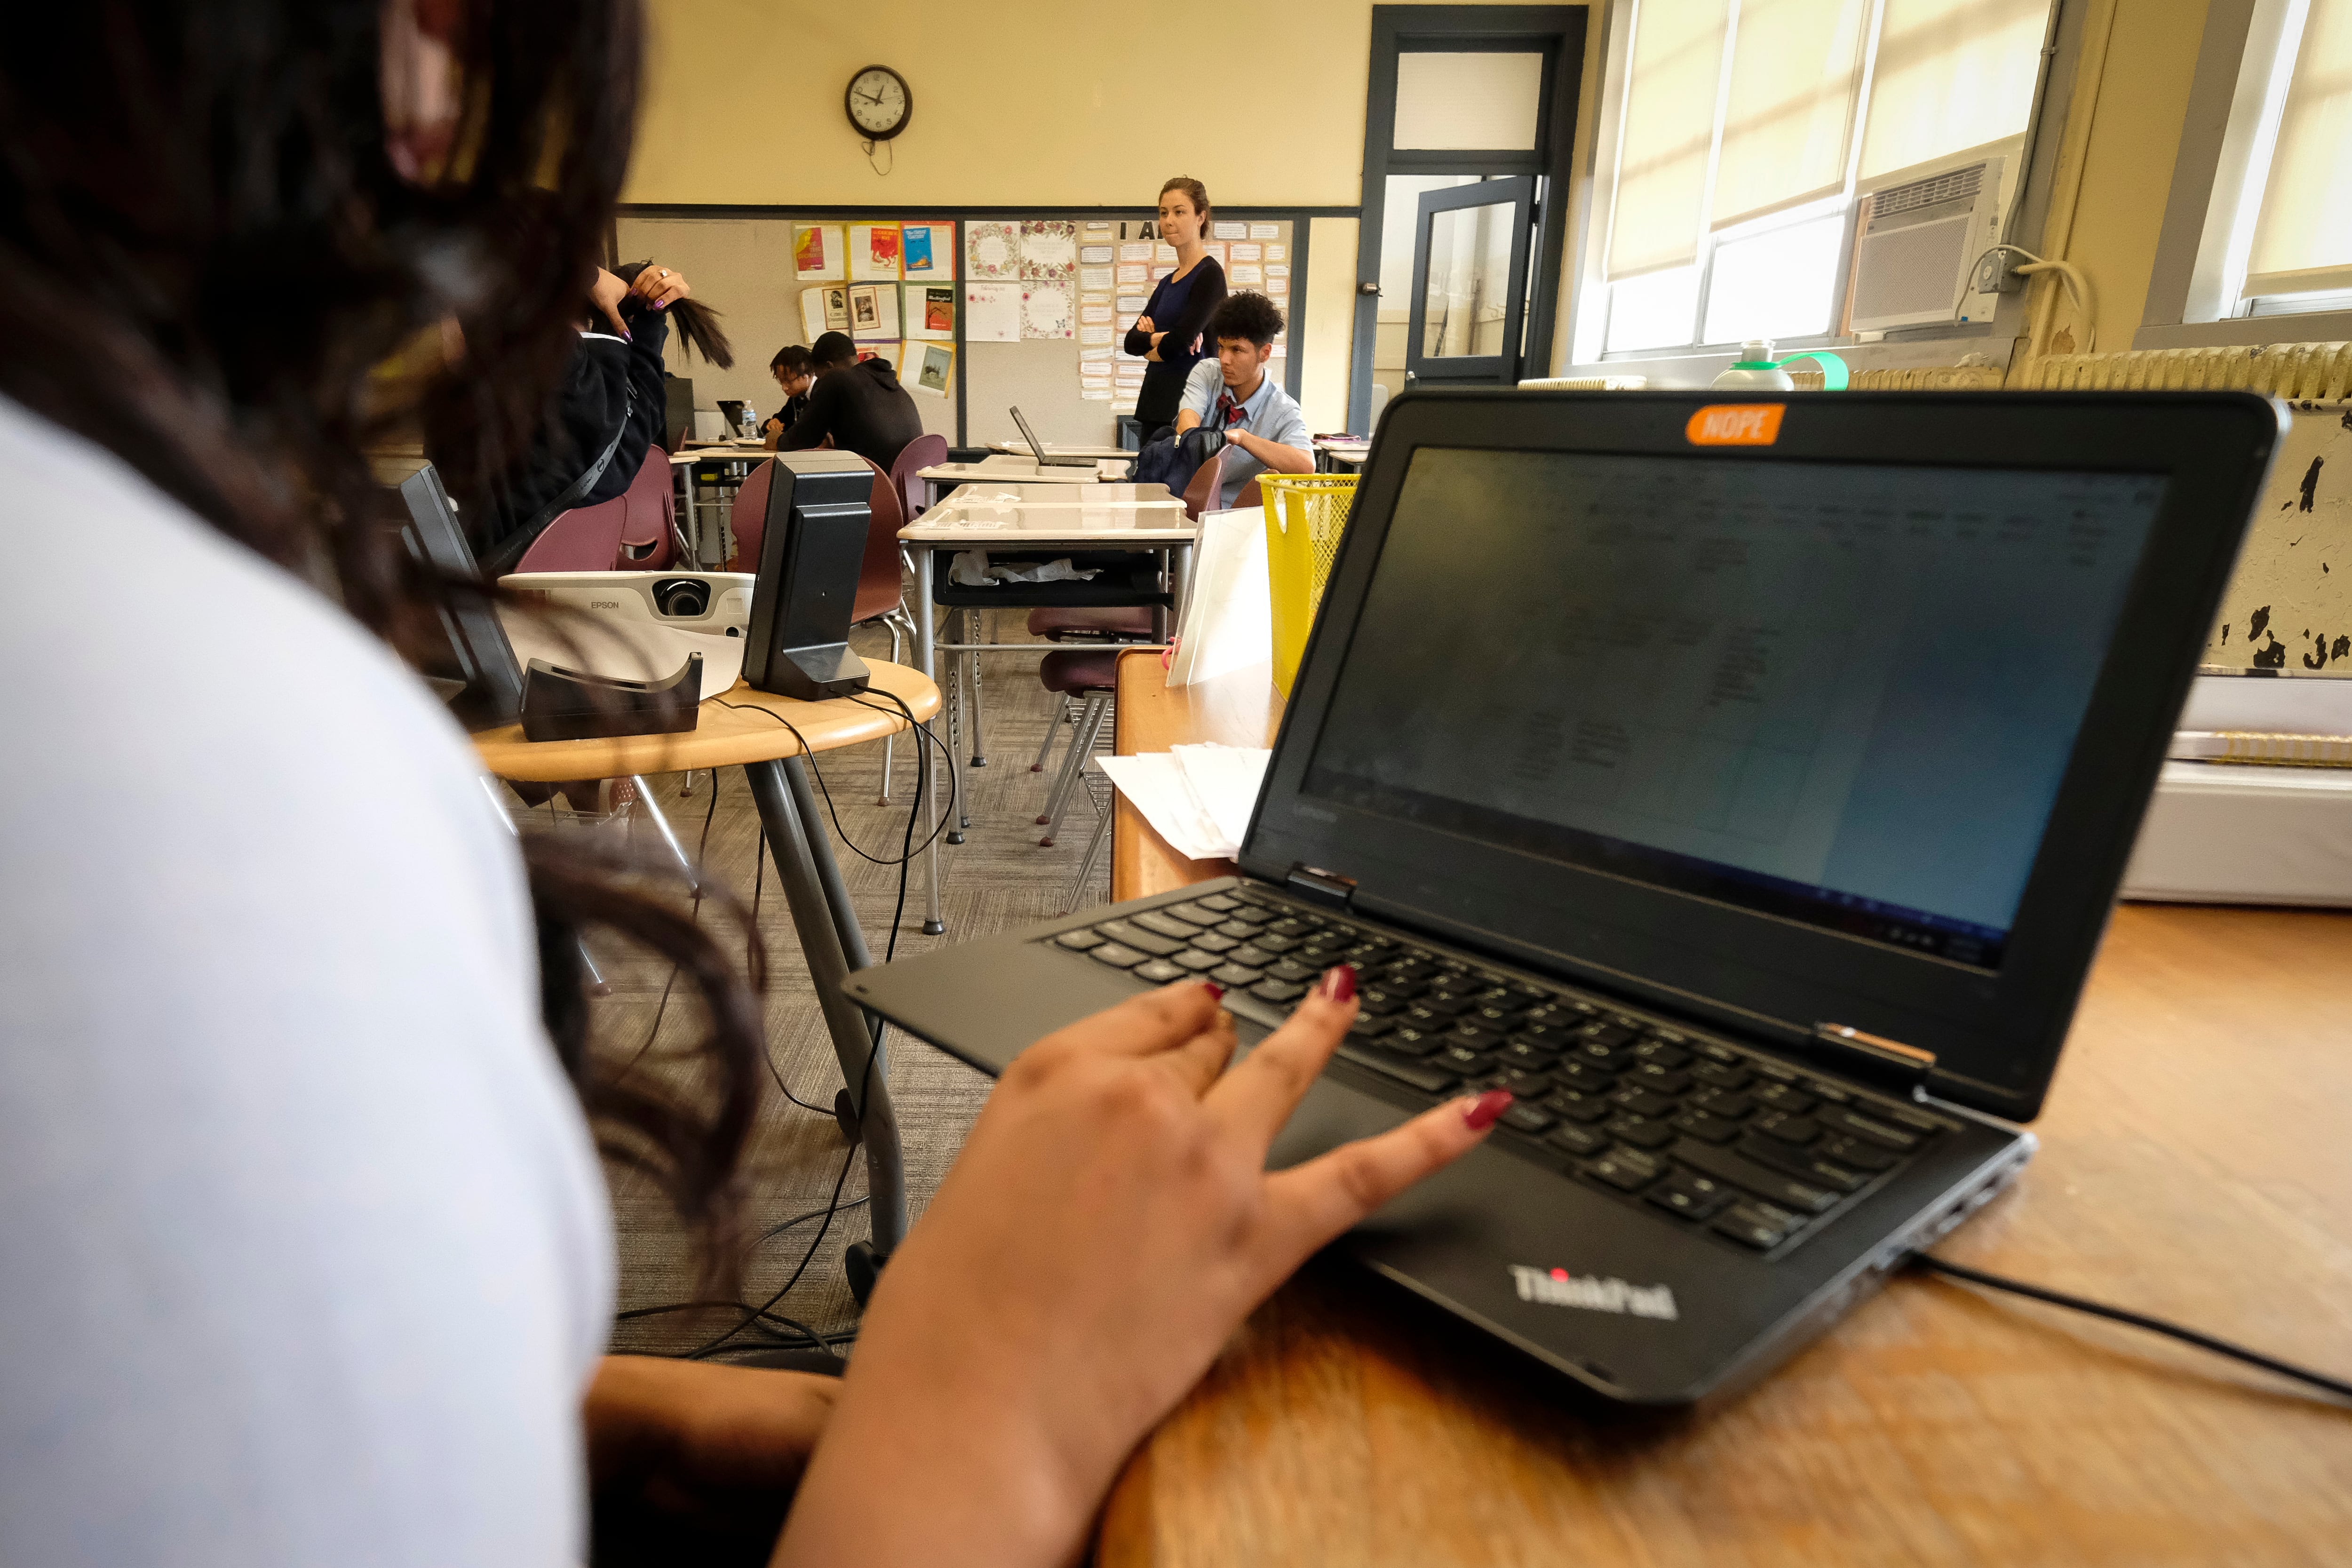 A female student in a classroom uses a laptop computer, with other people in the background.